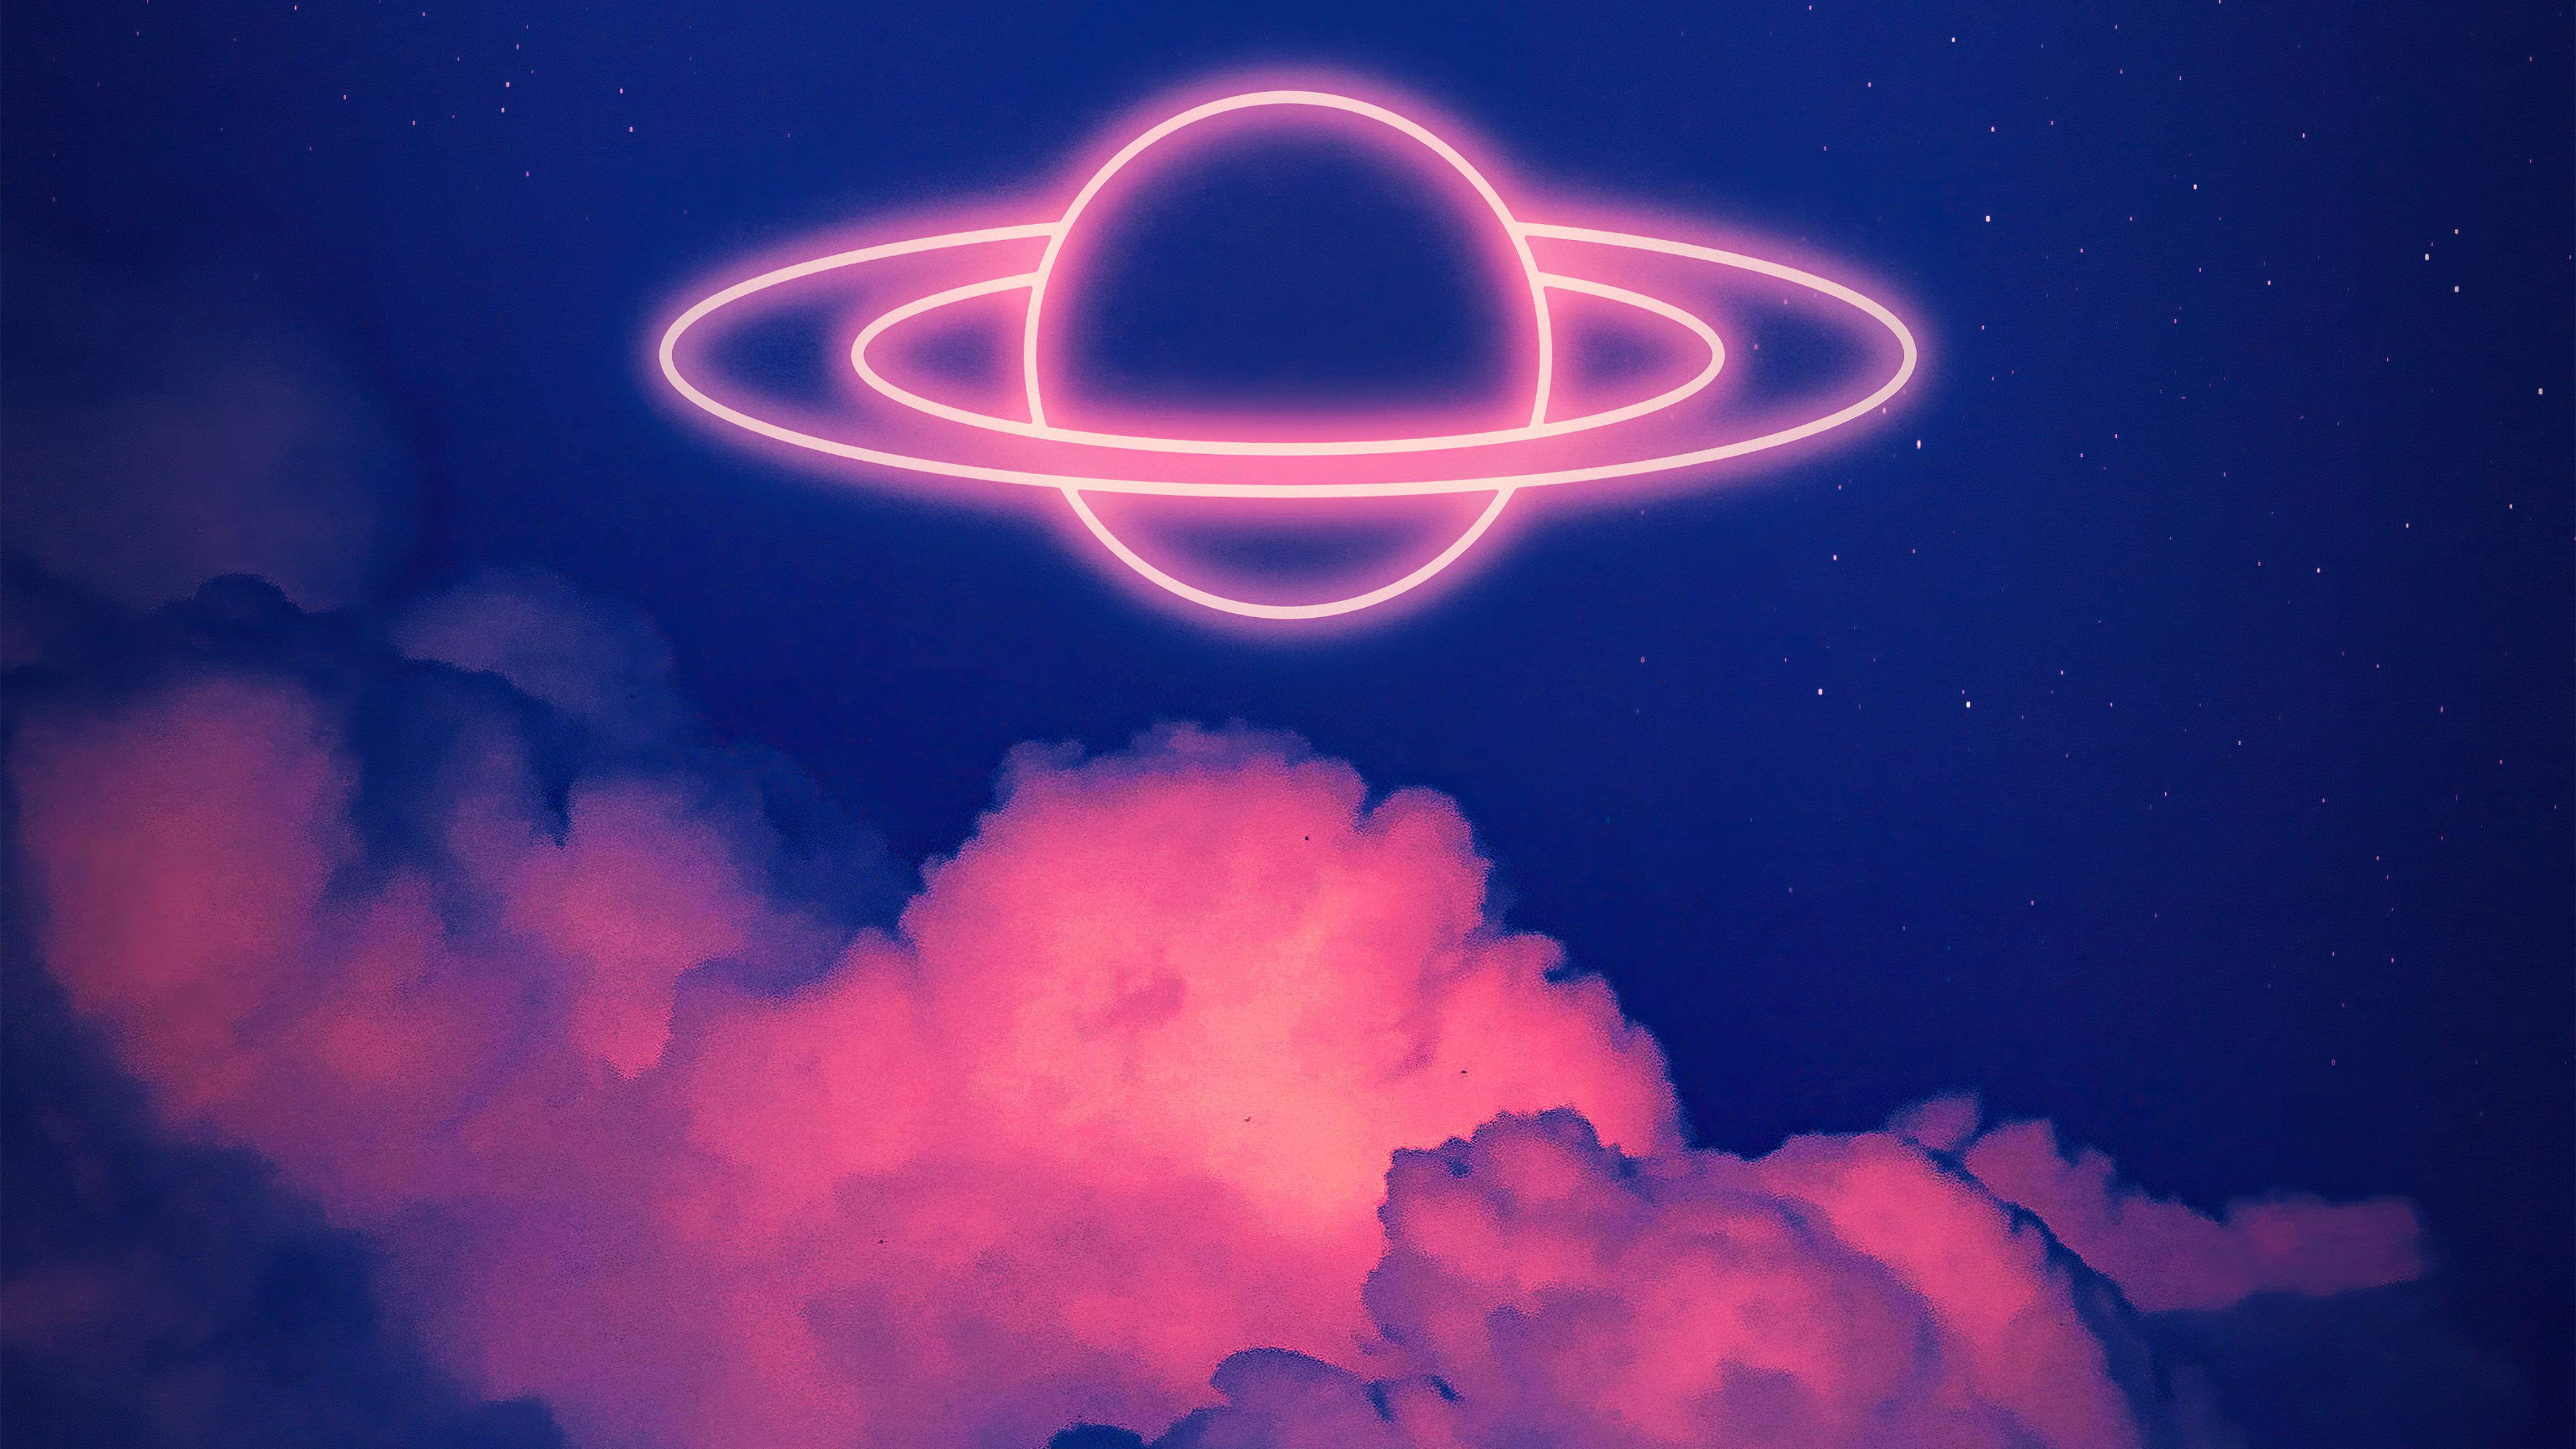 800x1280 Neon Planet Nexus 7,Samsung Galaxy Tab 10,Note Android Tablets HD  4k Wallpapers, Images, Backgrounds, Photos and Pictures